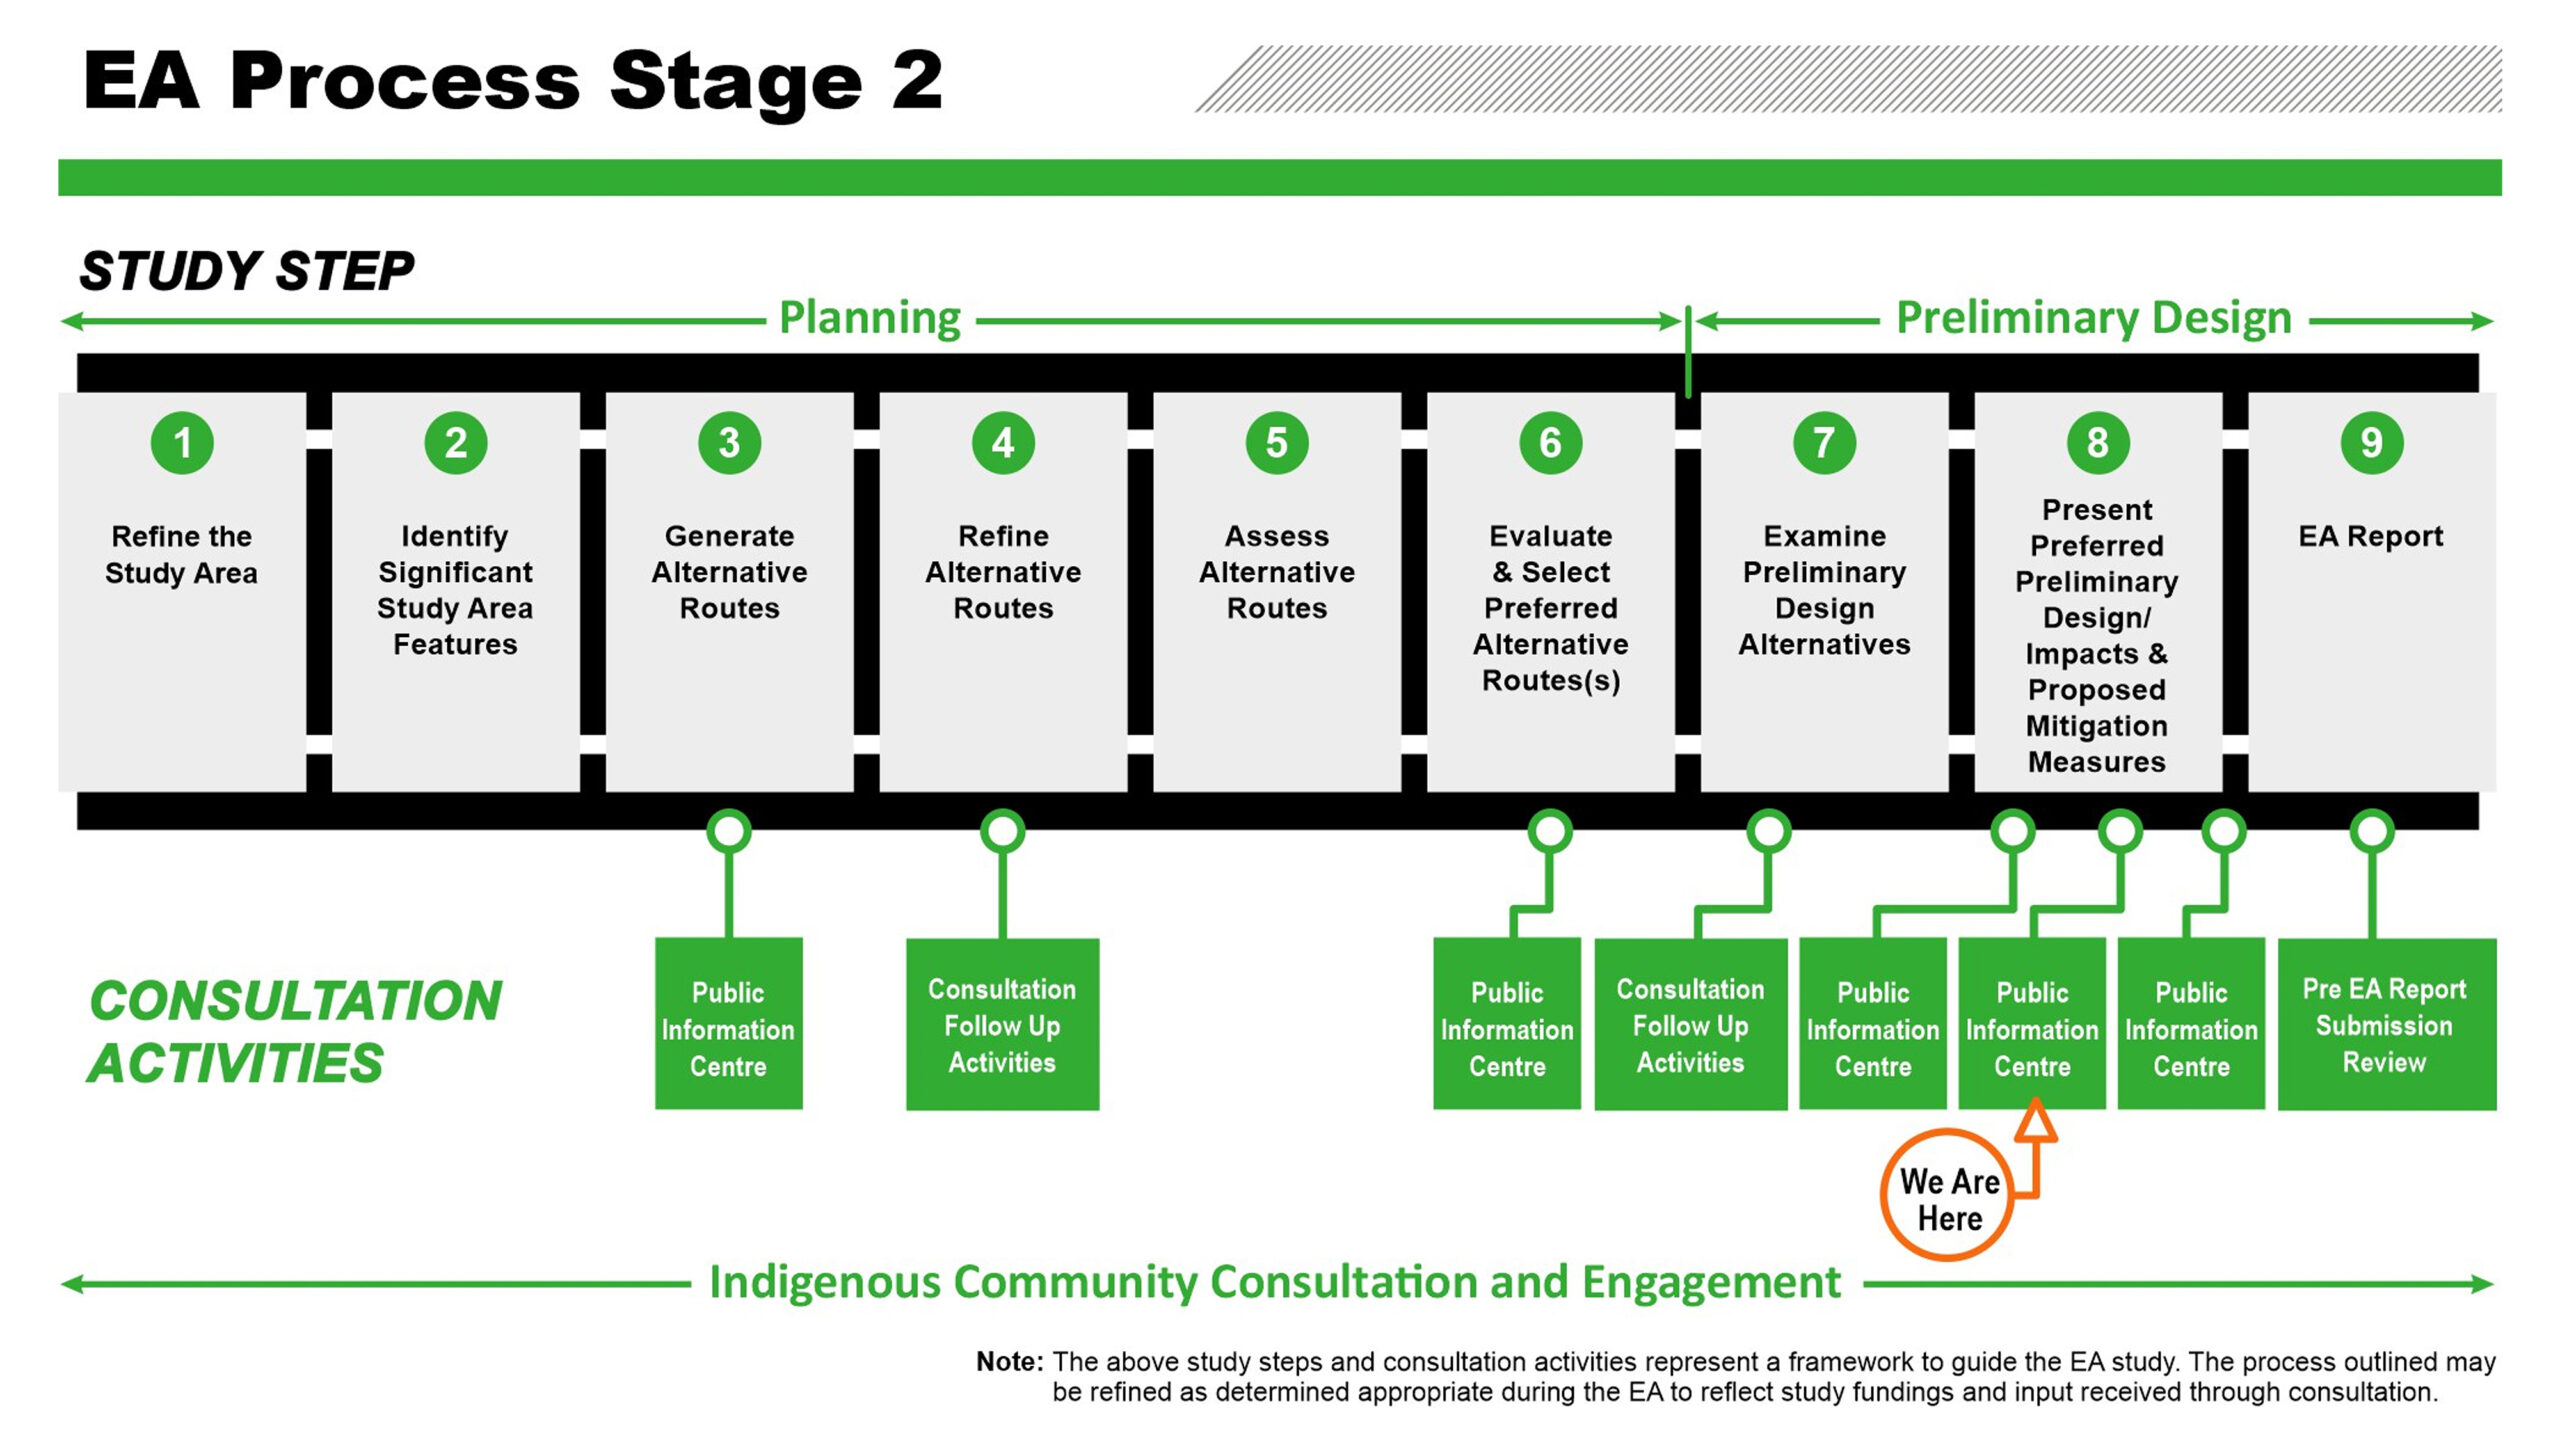 Image of the EA Process Stage 2 timeline, highlighting that the project is now at the Preferred Preliminary Design project stage